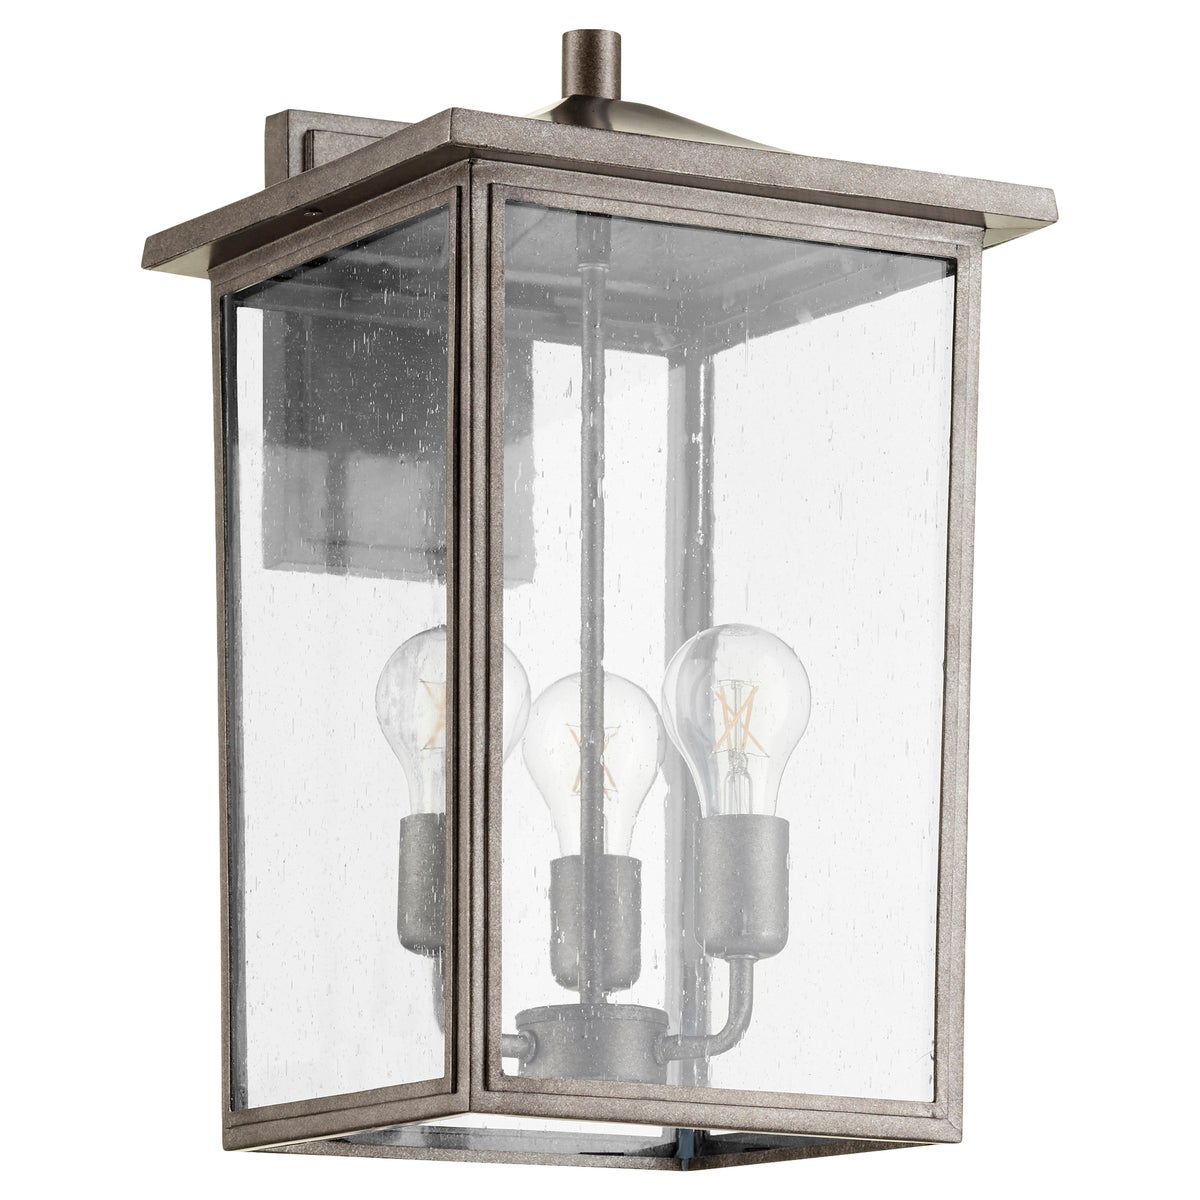 Farmhouse outdoor wall light with clear-seeded glass enclosure and three 60W medium base light sources. Adds a classic touch to your outdoor ensemble, providing warm ambient glow. Ideal for wet locations. Dimensions: 11"W x 18"H x 12.5"E. Warranty: 2 Years.